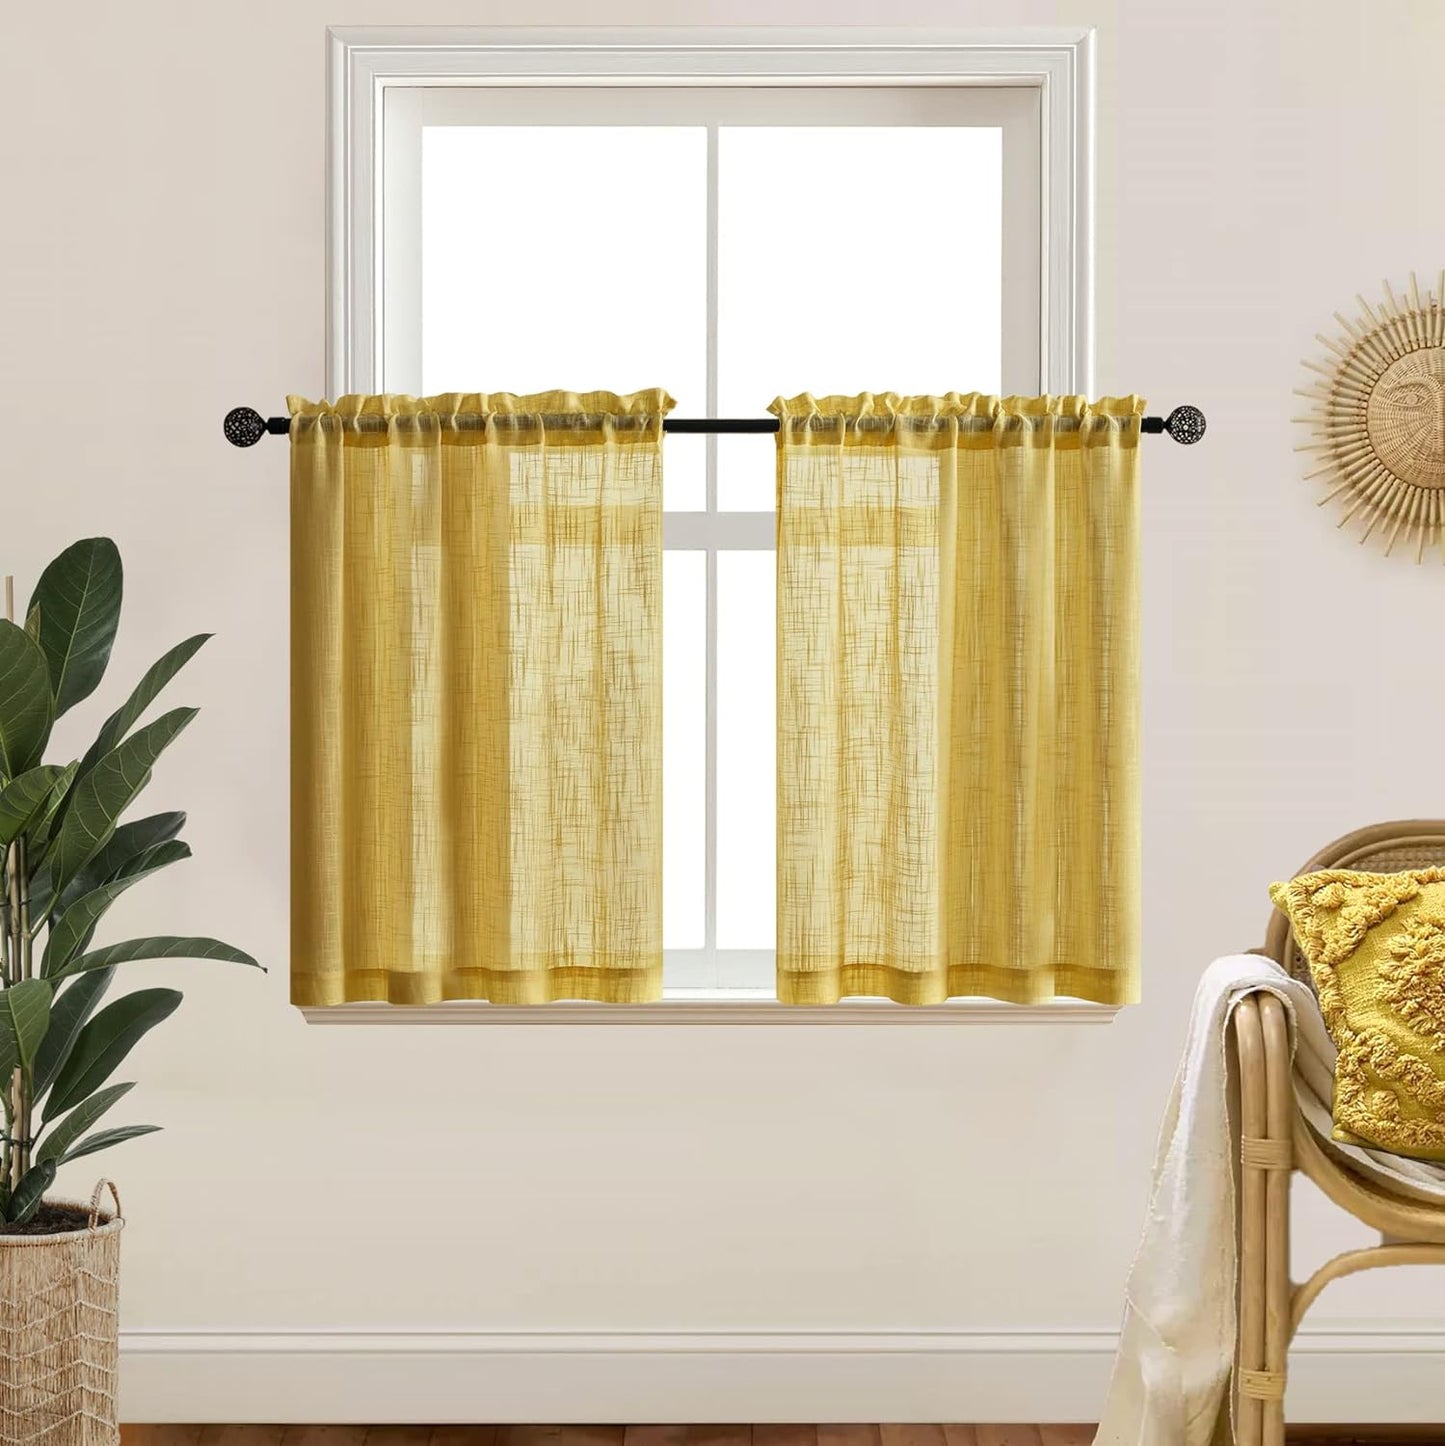 XTMYI White Kitchen Curtains 24 Inch Length Set of 2 Panels Cafe Curtain Tiers Linen Textured Semi Sheer Boho Farmhouse Short Curtains for Small Bathroom Basement Window RV Camper  XTMYI Yellow 25X30 